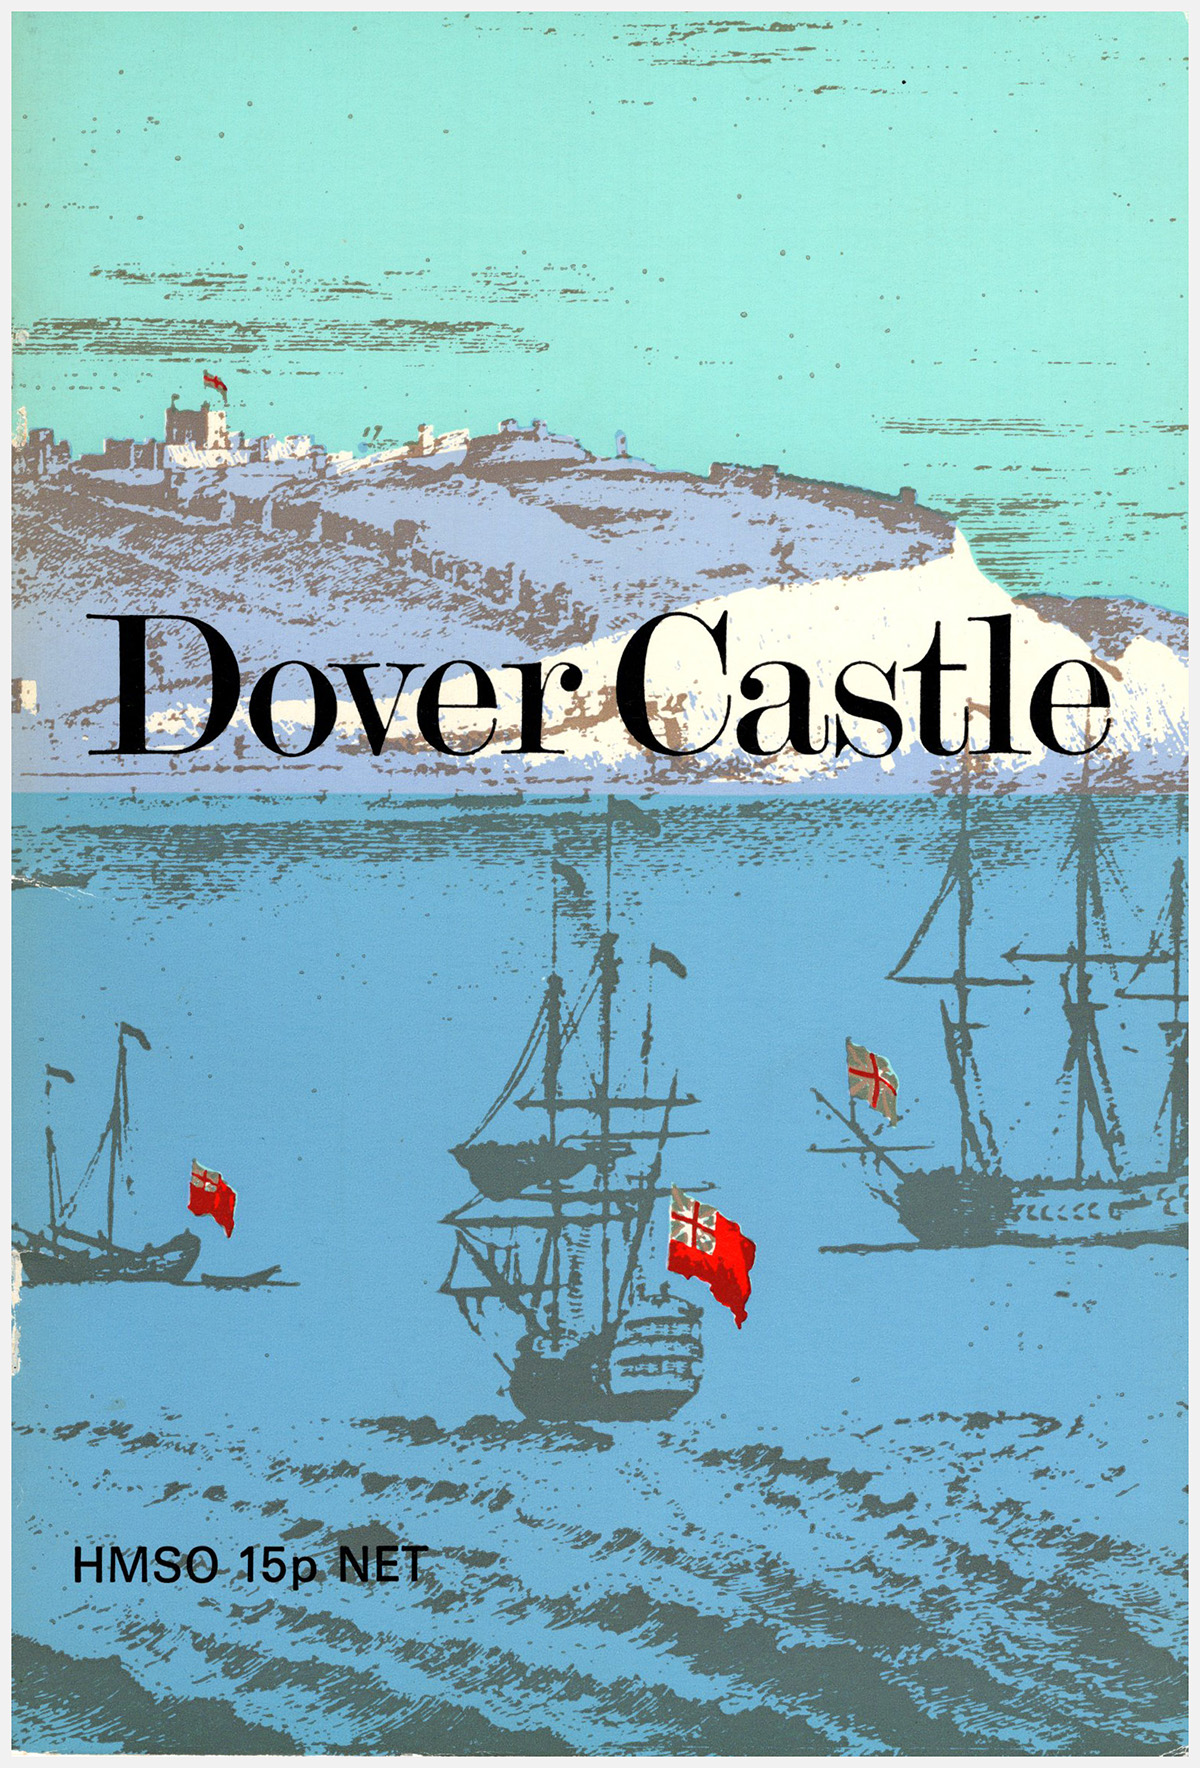 Brown, R. Allen - Dover Castle (Department of the Environment, Ancient Monuments and Historic Buildings)